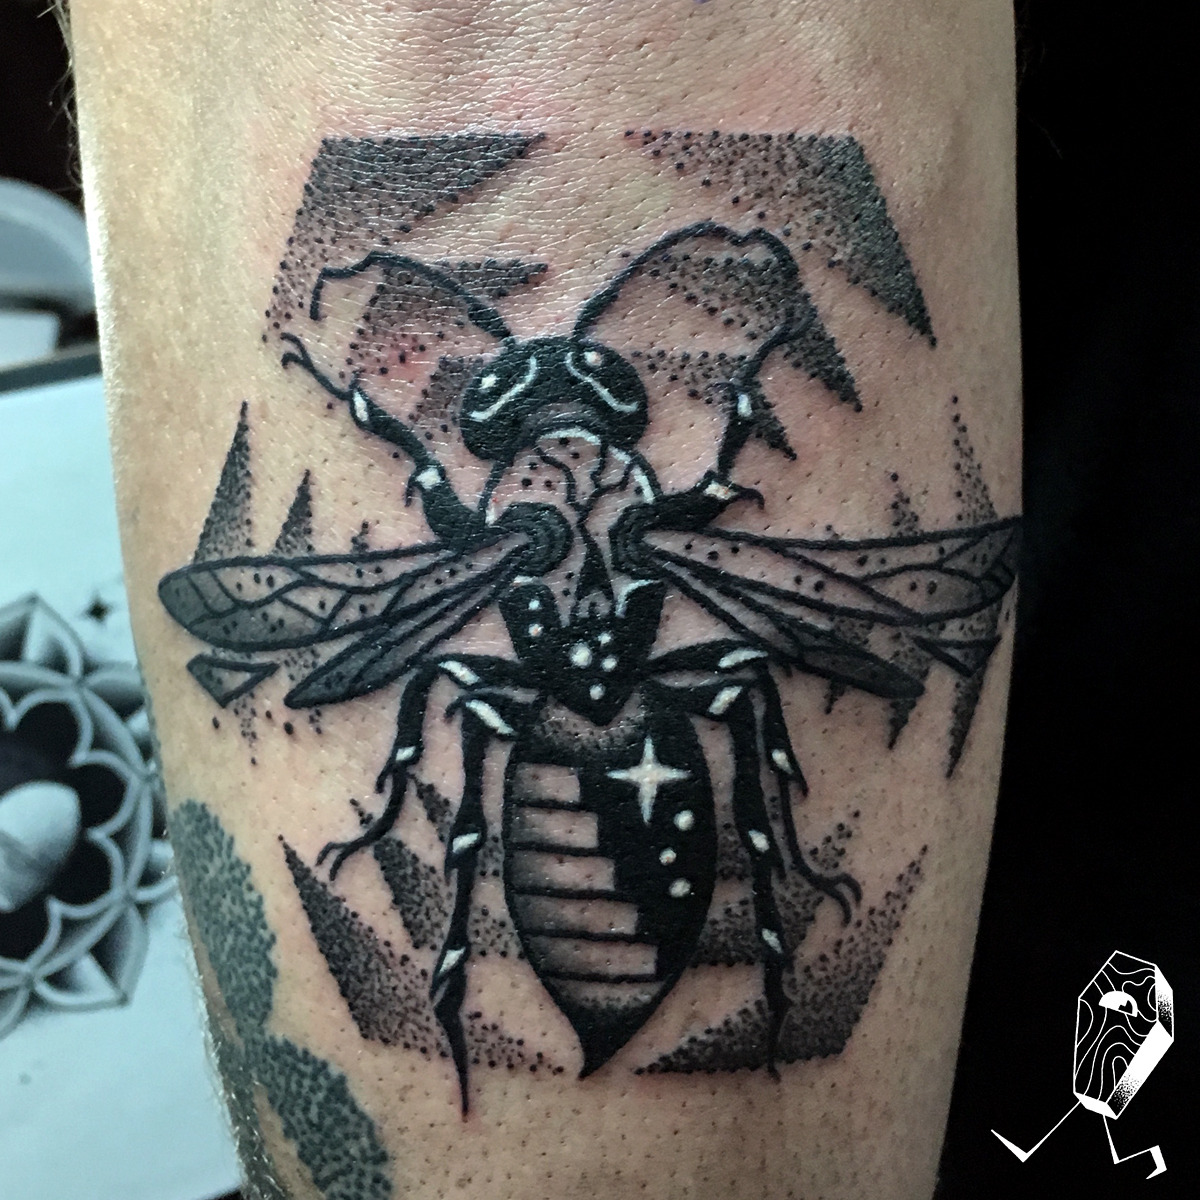 Tattoo uploaded by Pete Dutro • Another micro tattoo of a wasp • Tattoodo